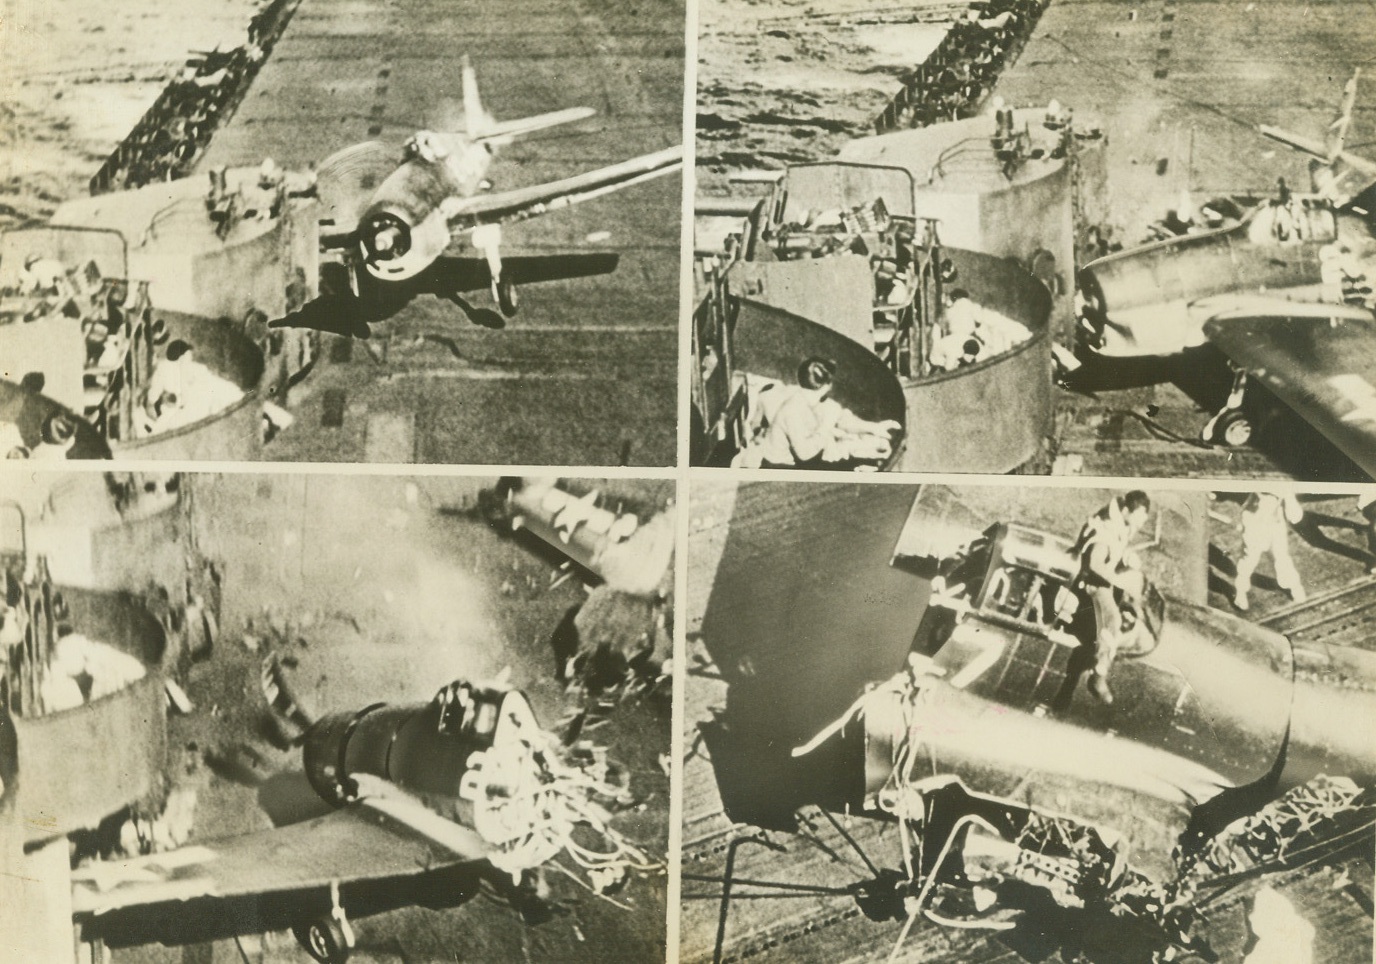 Drama Aboard the “Fighting Lady”, 1/5/1945. Pacific – This series of pictures depicts one of the most spectacular scenes from the U.S. Navy documentary film, “The Fighting Lady,” distributed by 20th Century-Fox. Action occurred when a Navy pilot came in for a landing on his carrier’s flight deck – plane out of control. The plane, upper left, prop whirling, swerves into the island at the side of the carrier. As the right wing smashes into the tower, the plane swings around, telescoping the nose and splitting the fuselage. At lower left, the plane has been brought to a stop after reversing its field. Men in gun turret bend low to lessen shock of concussion. Wires trail from front end of fuselage but the cockpit is intact. In last photo, lower right, the pilot, miraculously unhurt, climbs out of his seat. Credit: U.S. Navy photo from ACME;